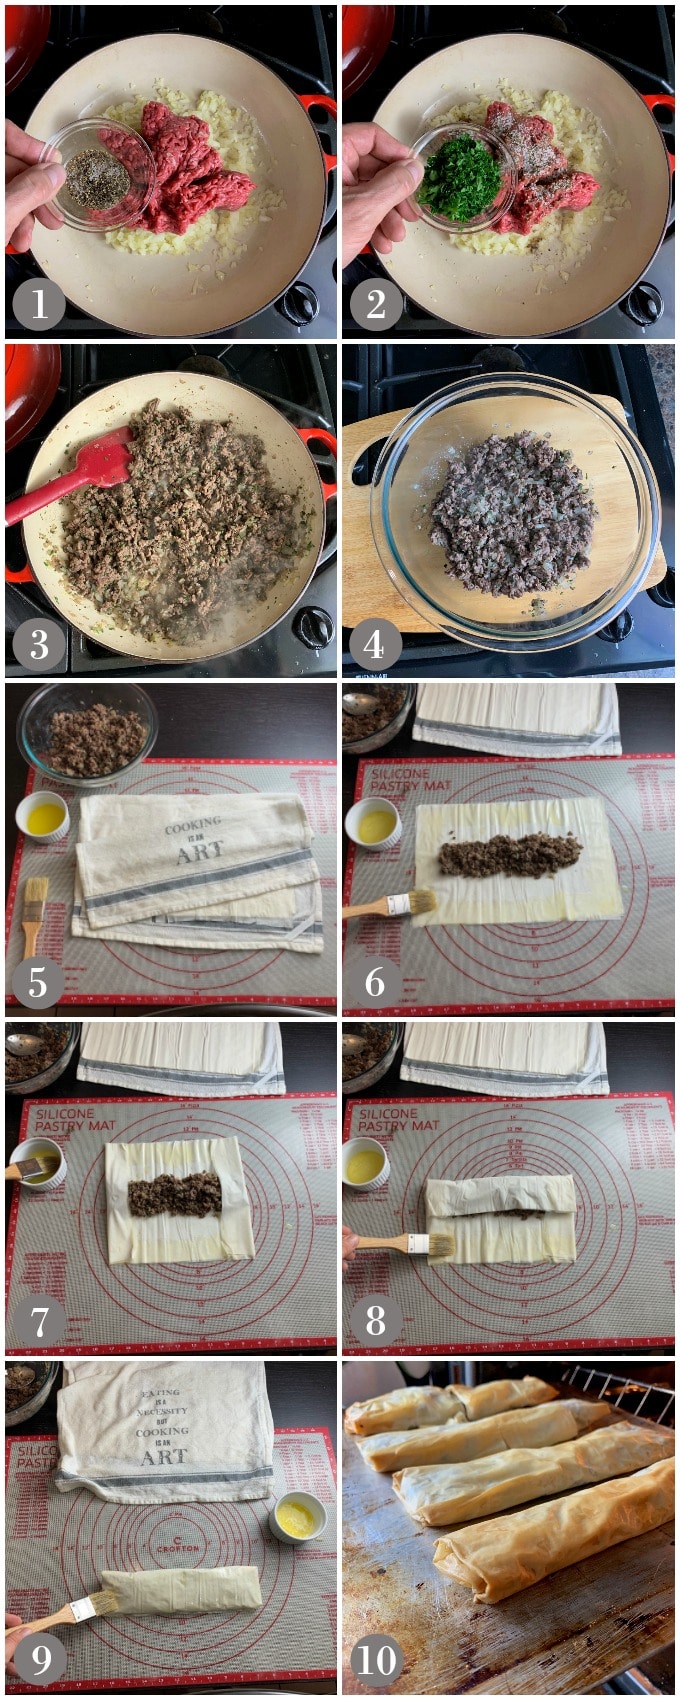 A collage of photos showing how to cook the beef filling and wrap in phyllo dough and bake.